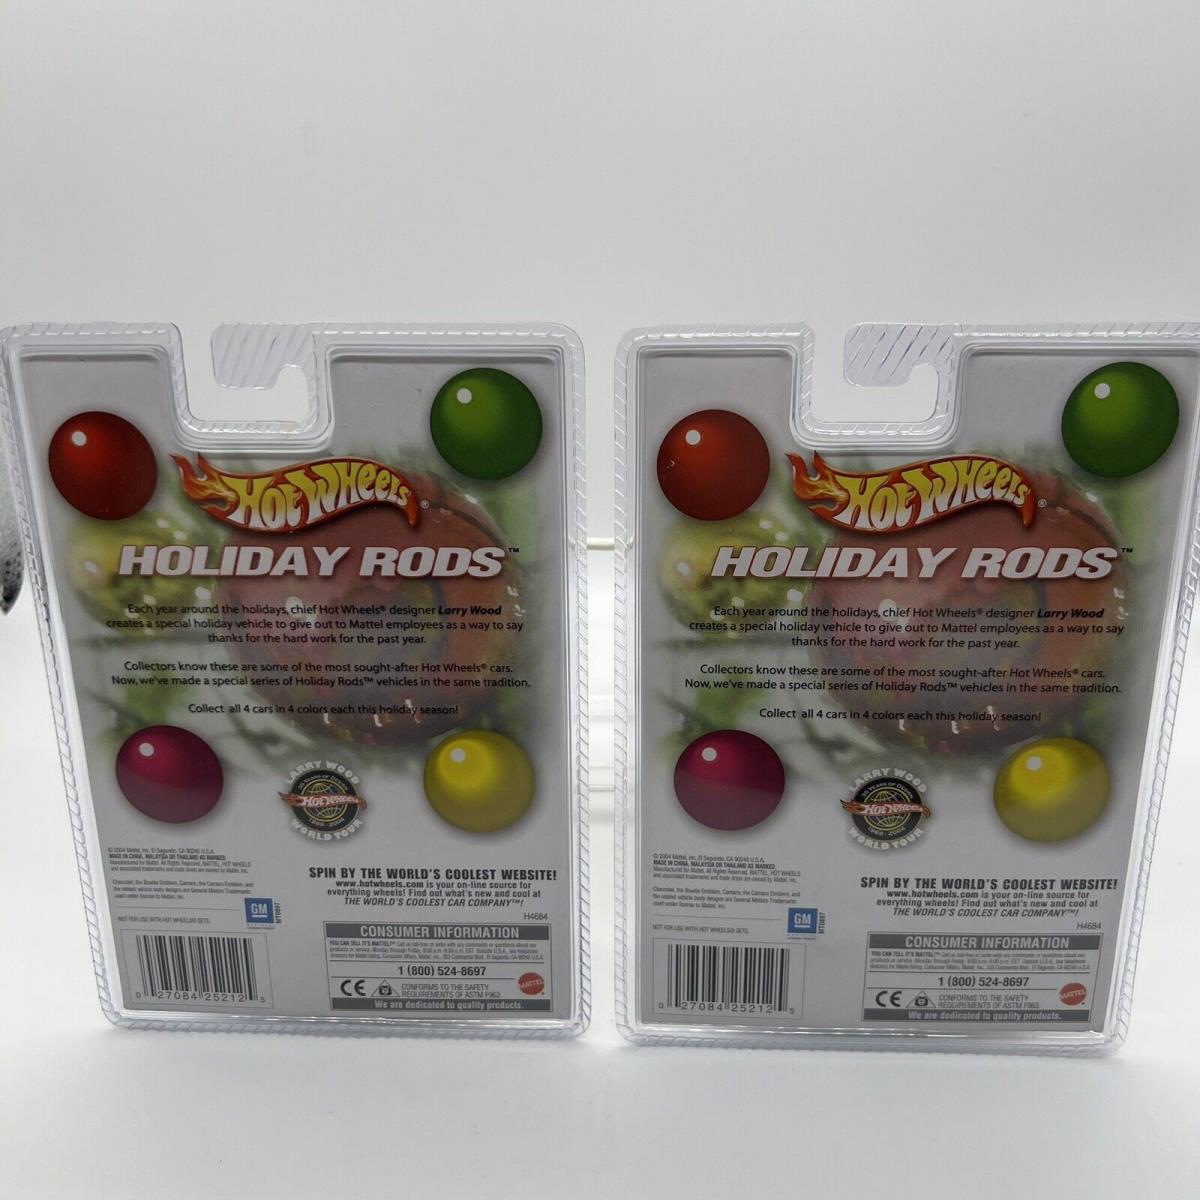 Holiday Rods Hot Wheels 1967 Camaros Two Colors. Larry Wood Mattel Sealed